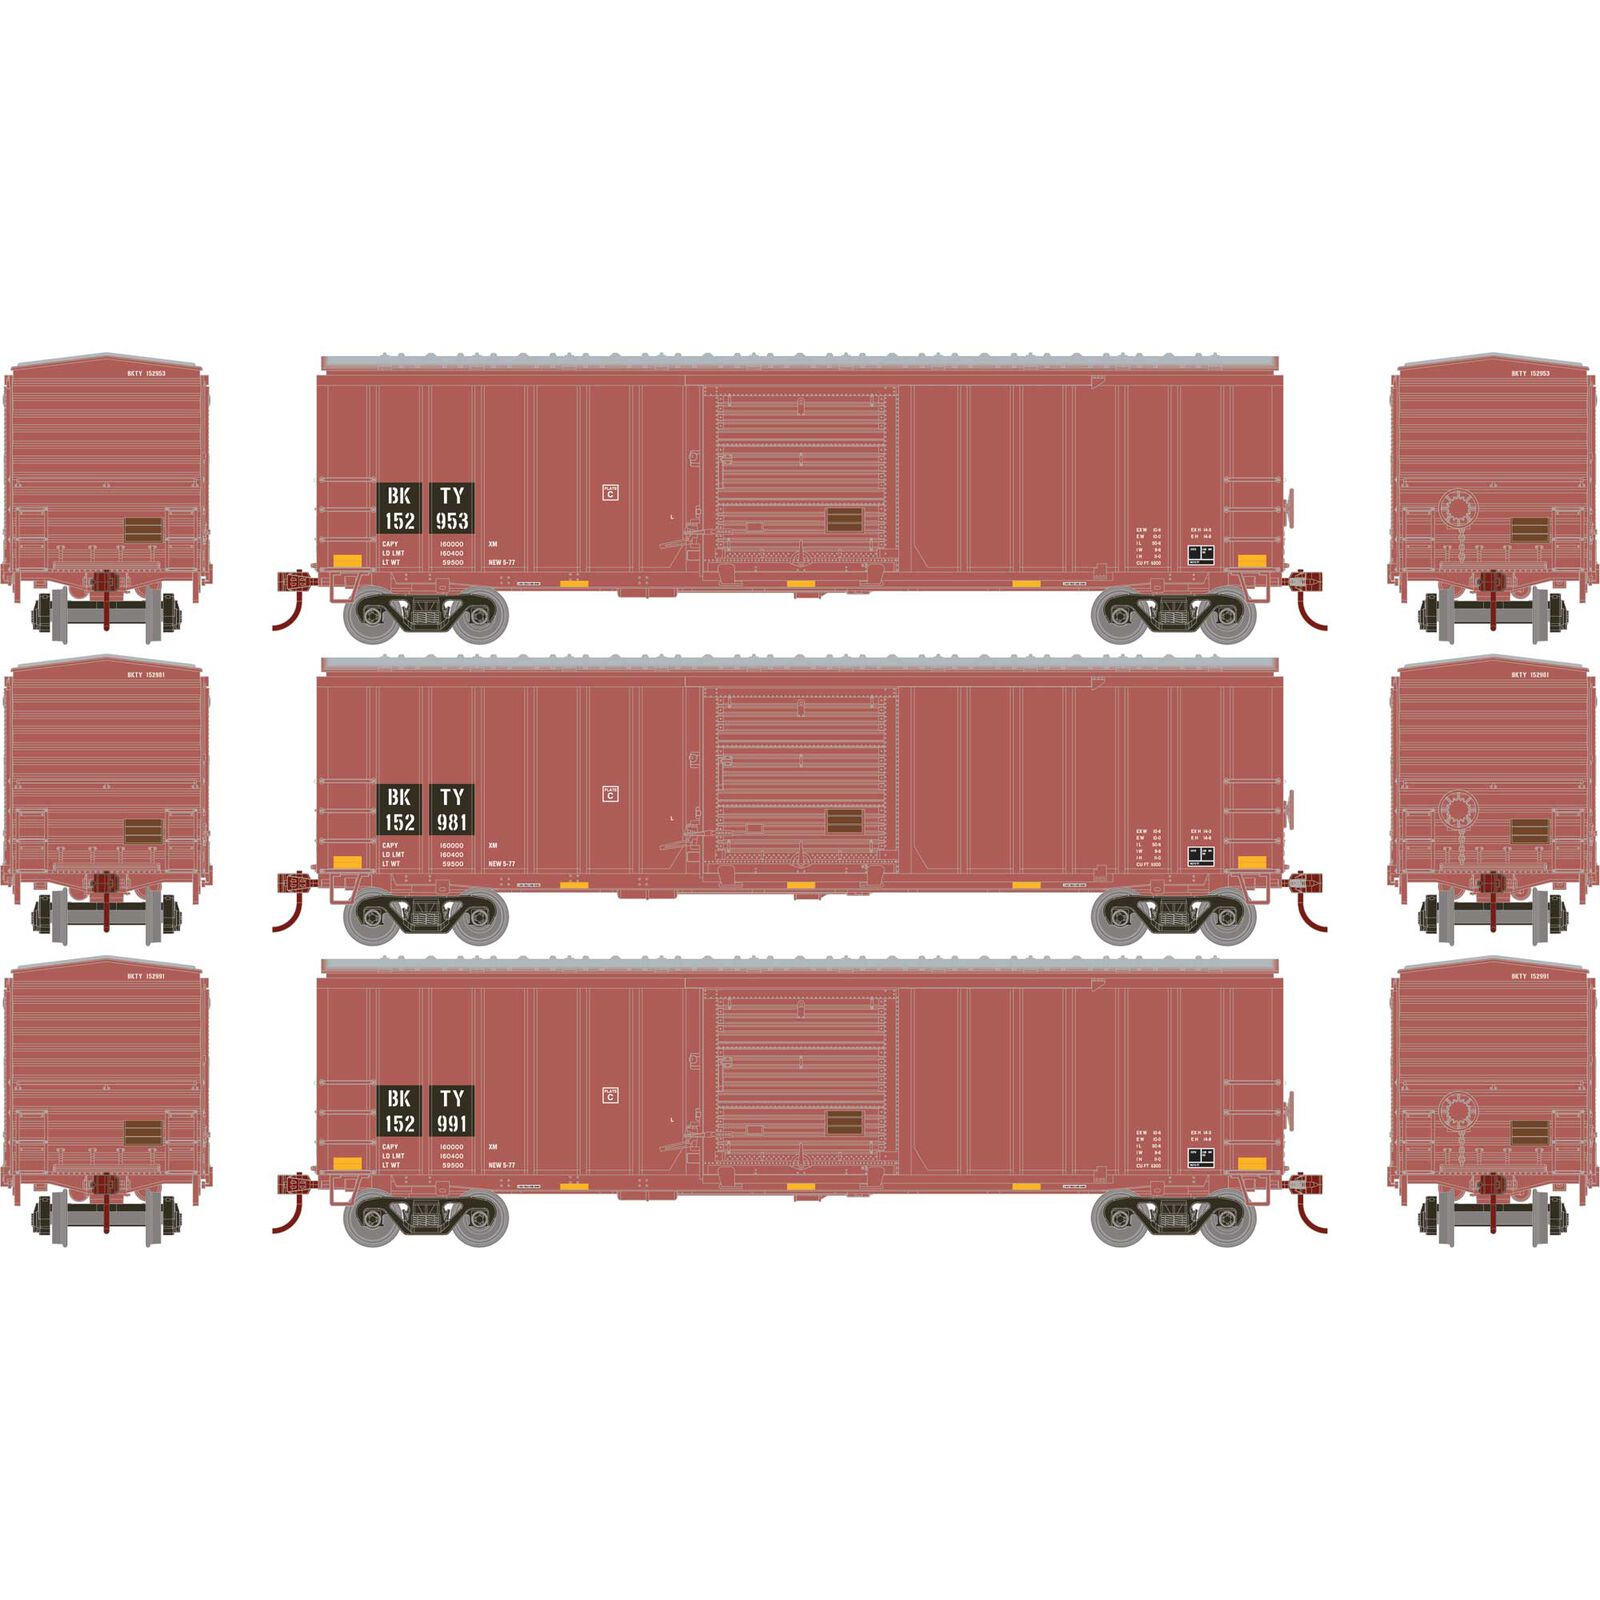 HO 50' ACF Outer Post Box Car, BKTY #152953 / 152981 / 152991 (3)